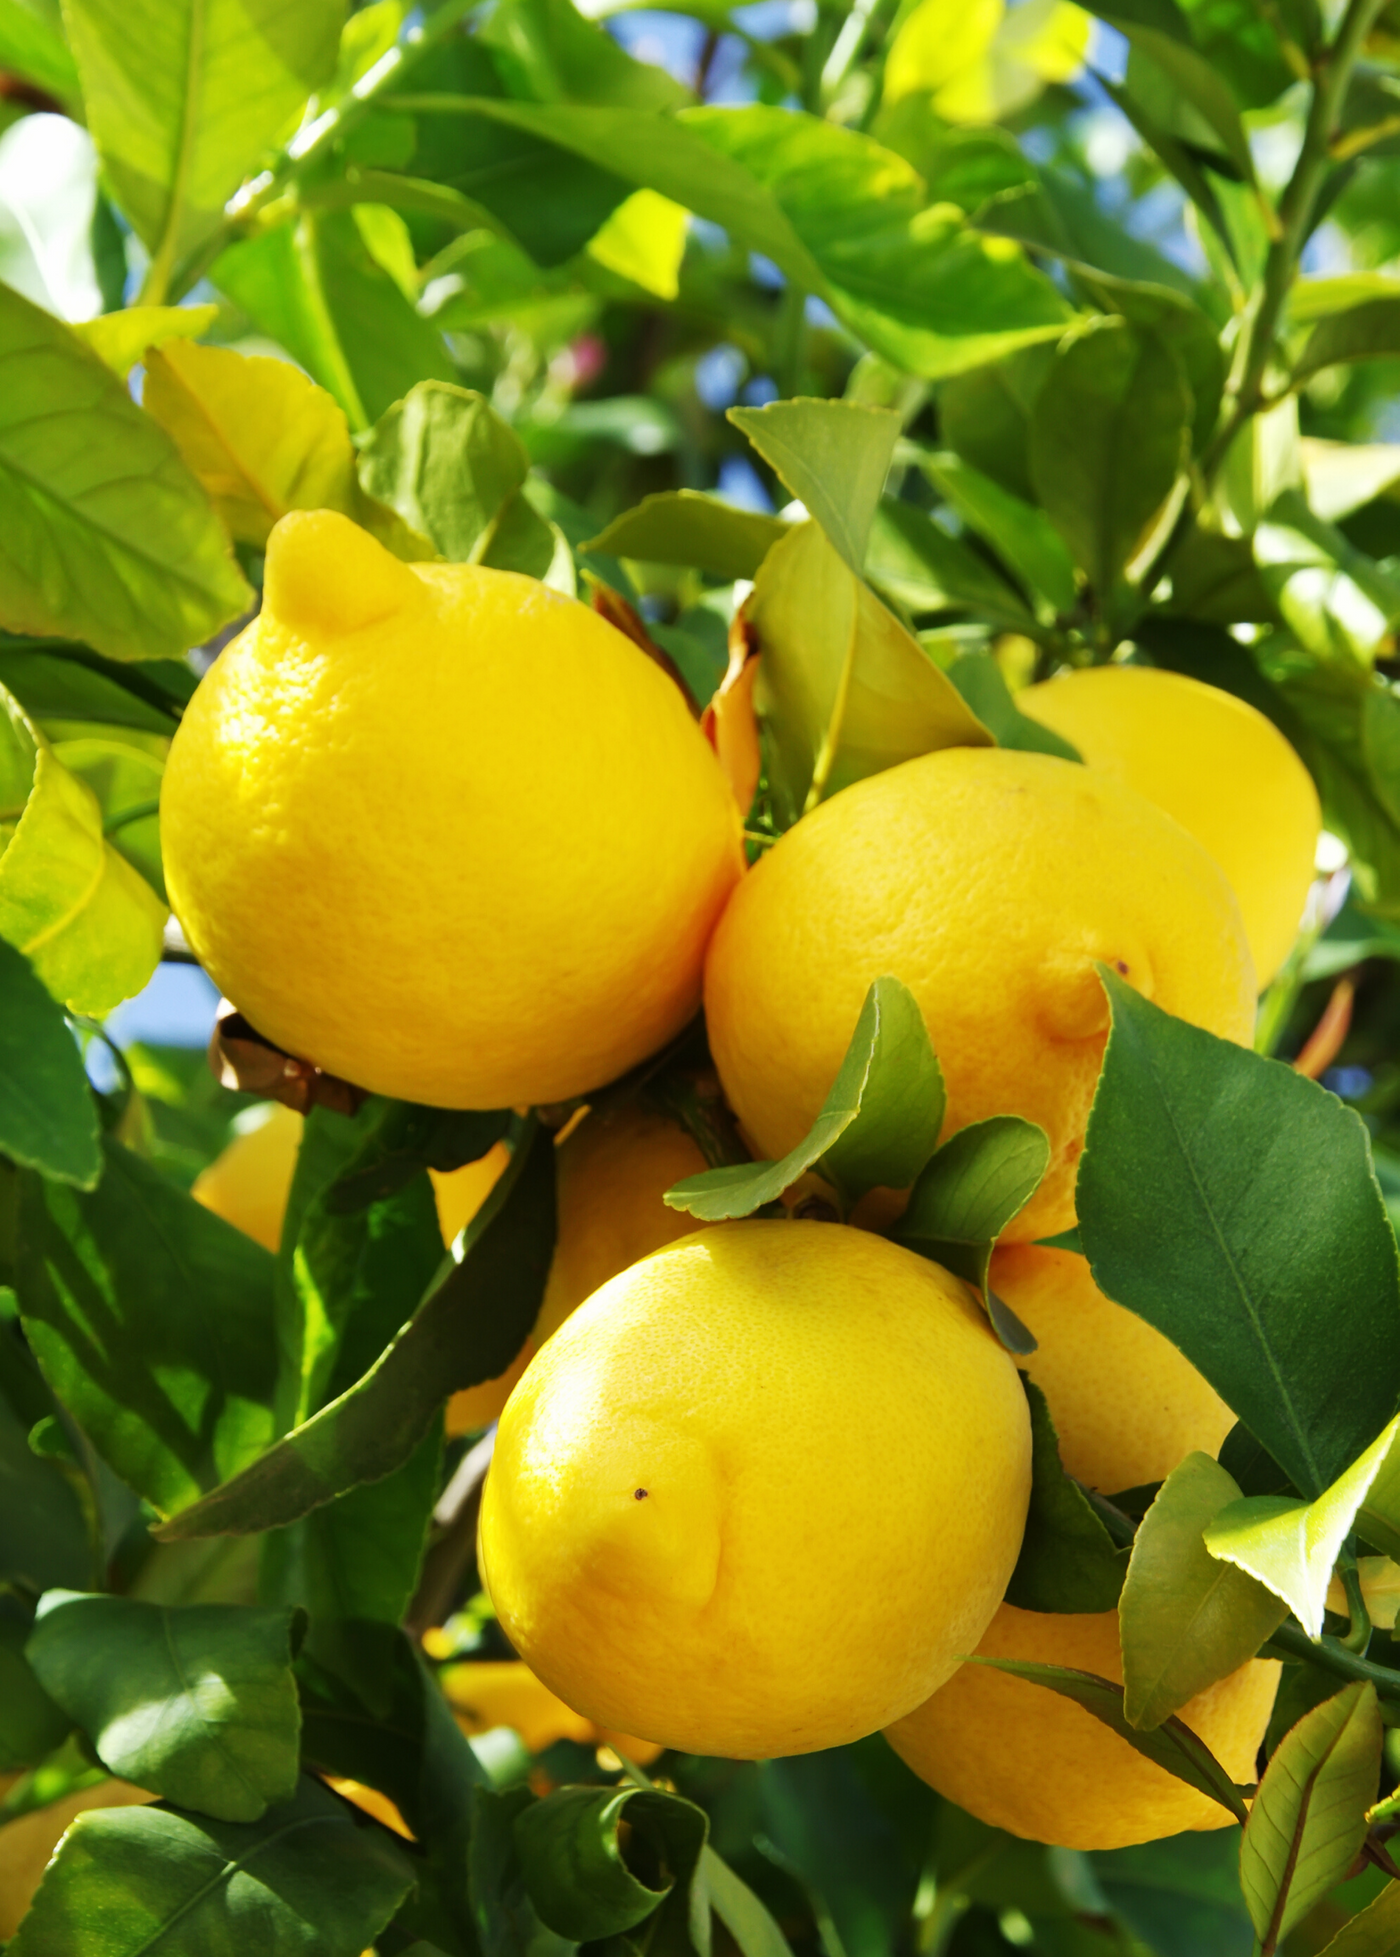 Supplies for Growing Citrus Trees